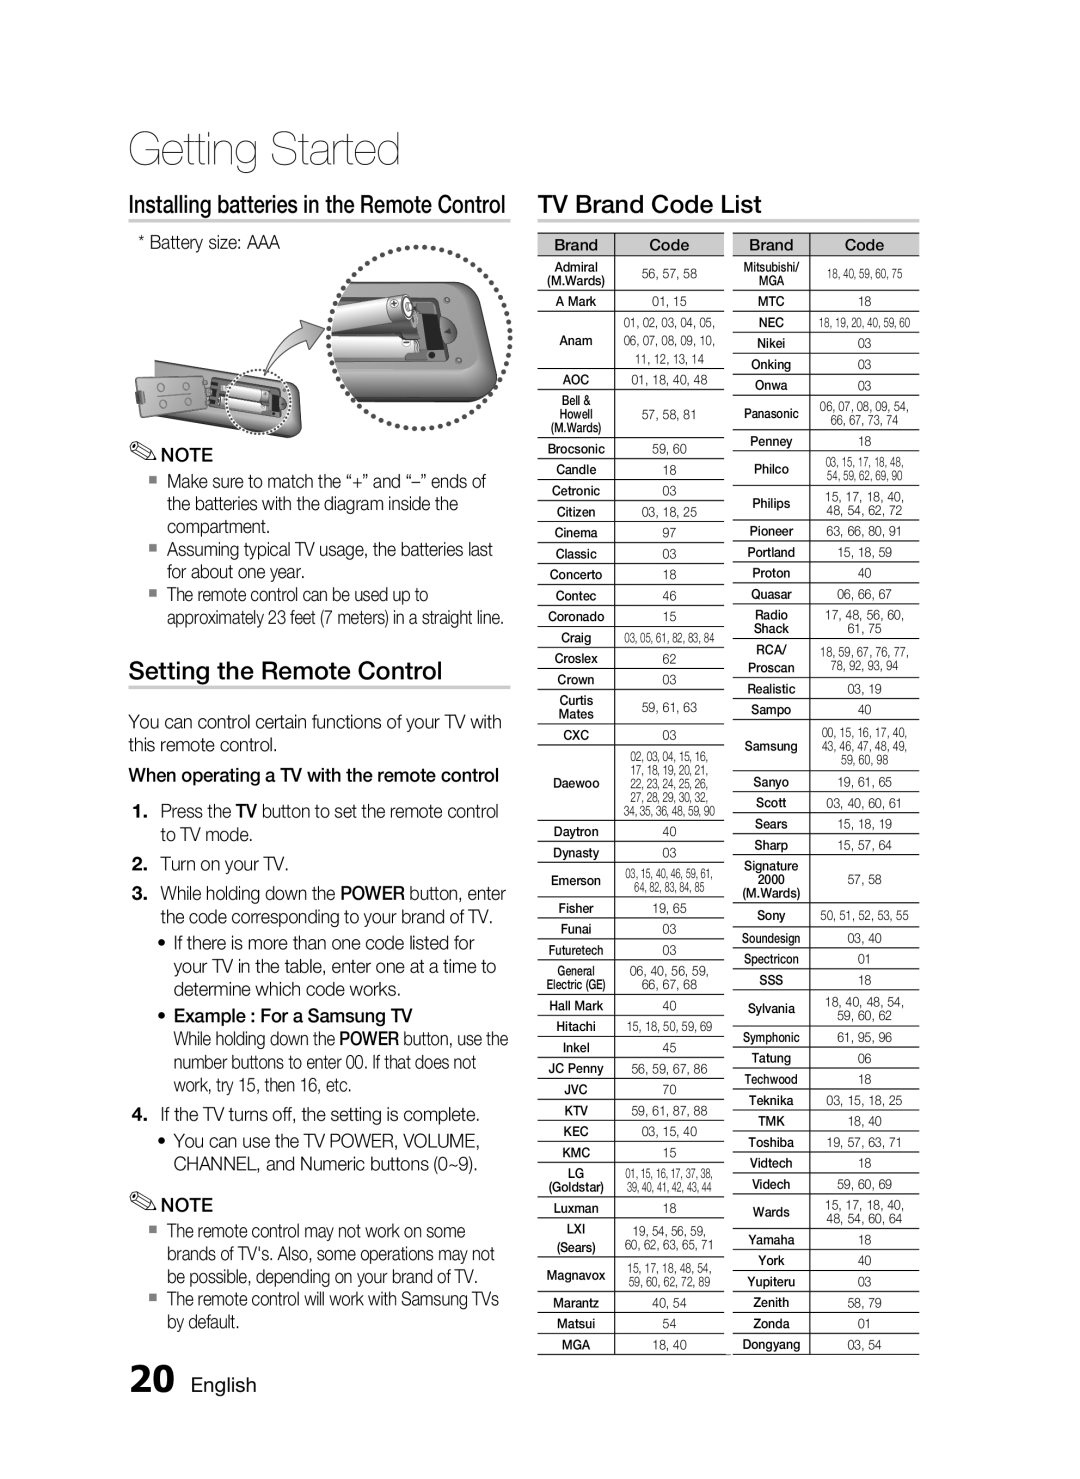 Samsung HW-D7000 user manual TV Brand Code List, Setting the Remote Control, Installing batteries in the Remote Control 